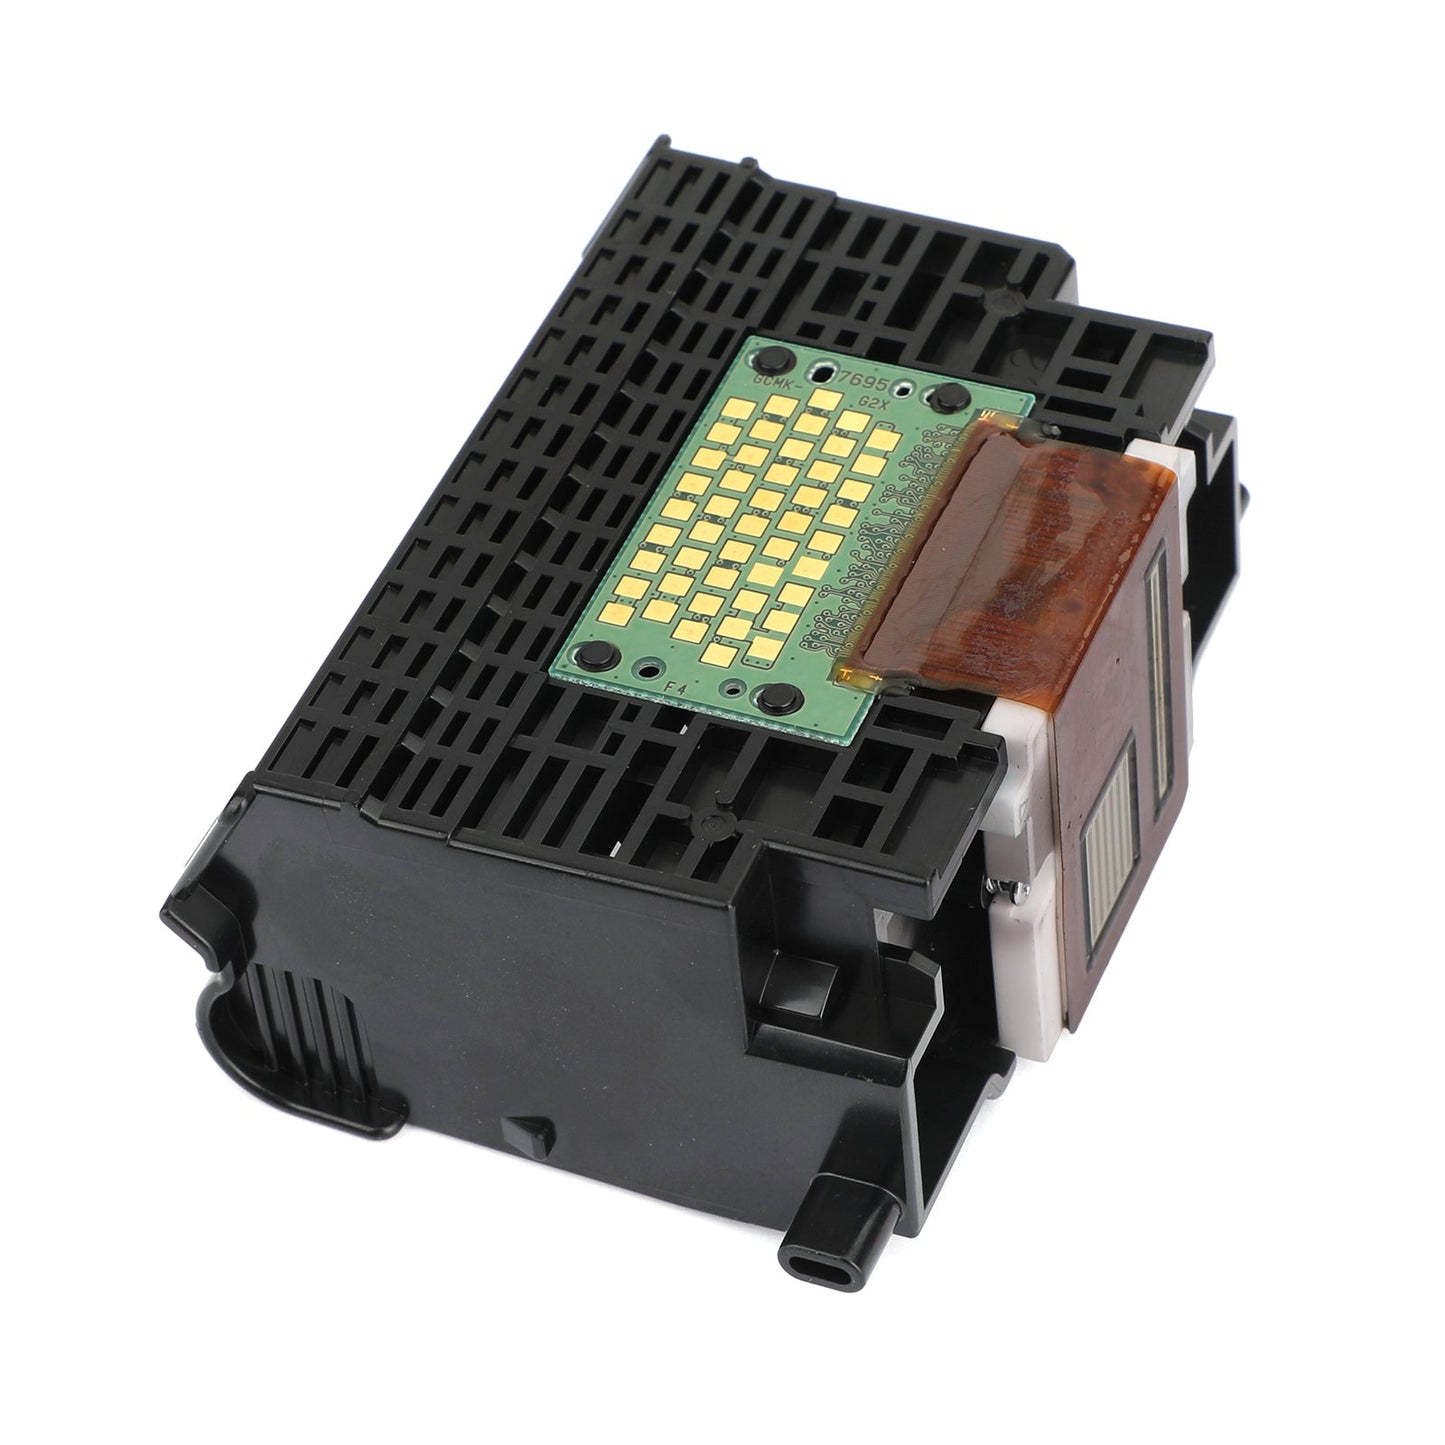 Replacement Printer Print Head QY6-0075 For IP5300 MP810 iP4500 MP610 MX850,Full Color QY6-0075 Printhead Printer Head for IP5300 MP810 iP4500 MP610 MX850,Reufrbished Printer Print Head for IP5300 MP810 iP4500 MP610 MX850 QY6-0075